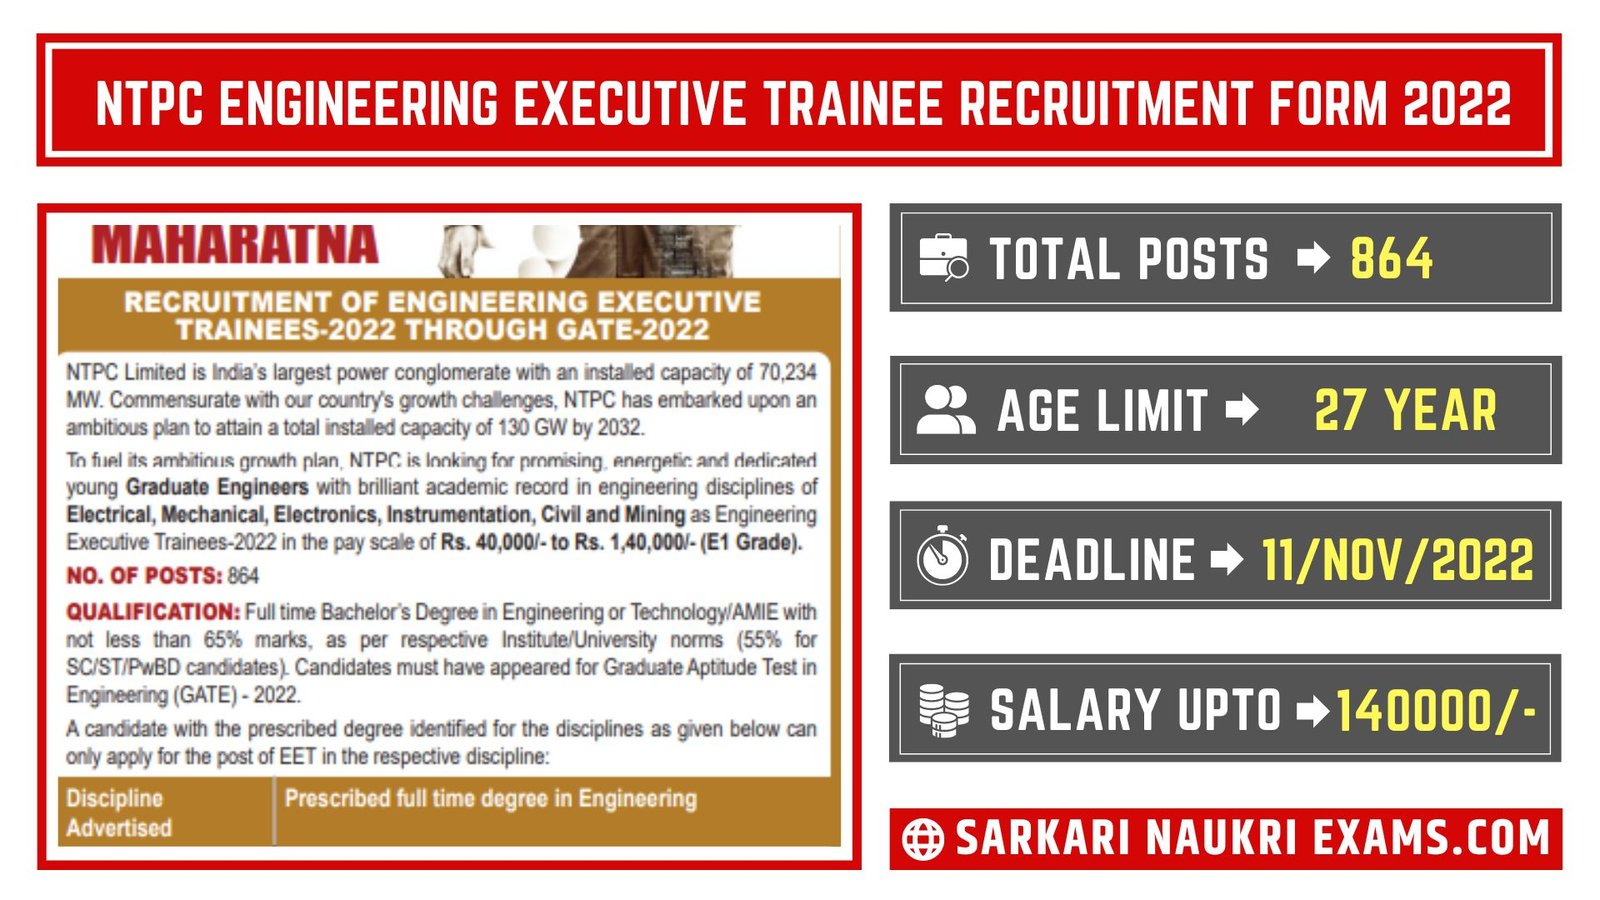 NTPC Limited Engineering Executive Trainee Recruitment Form 2022